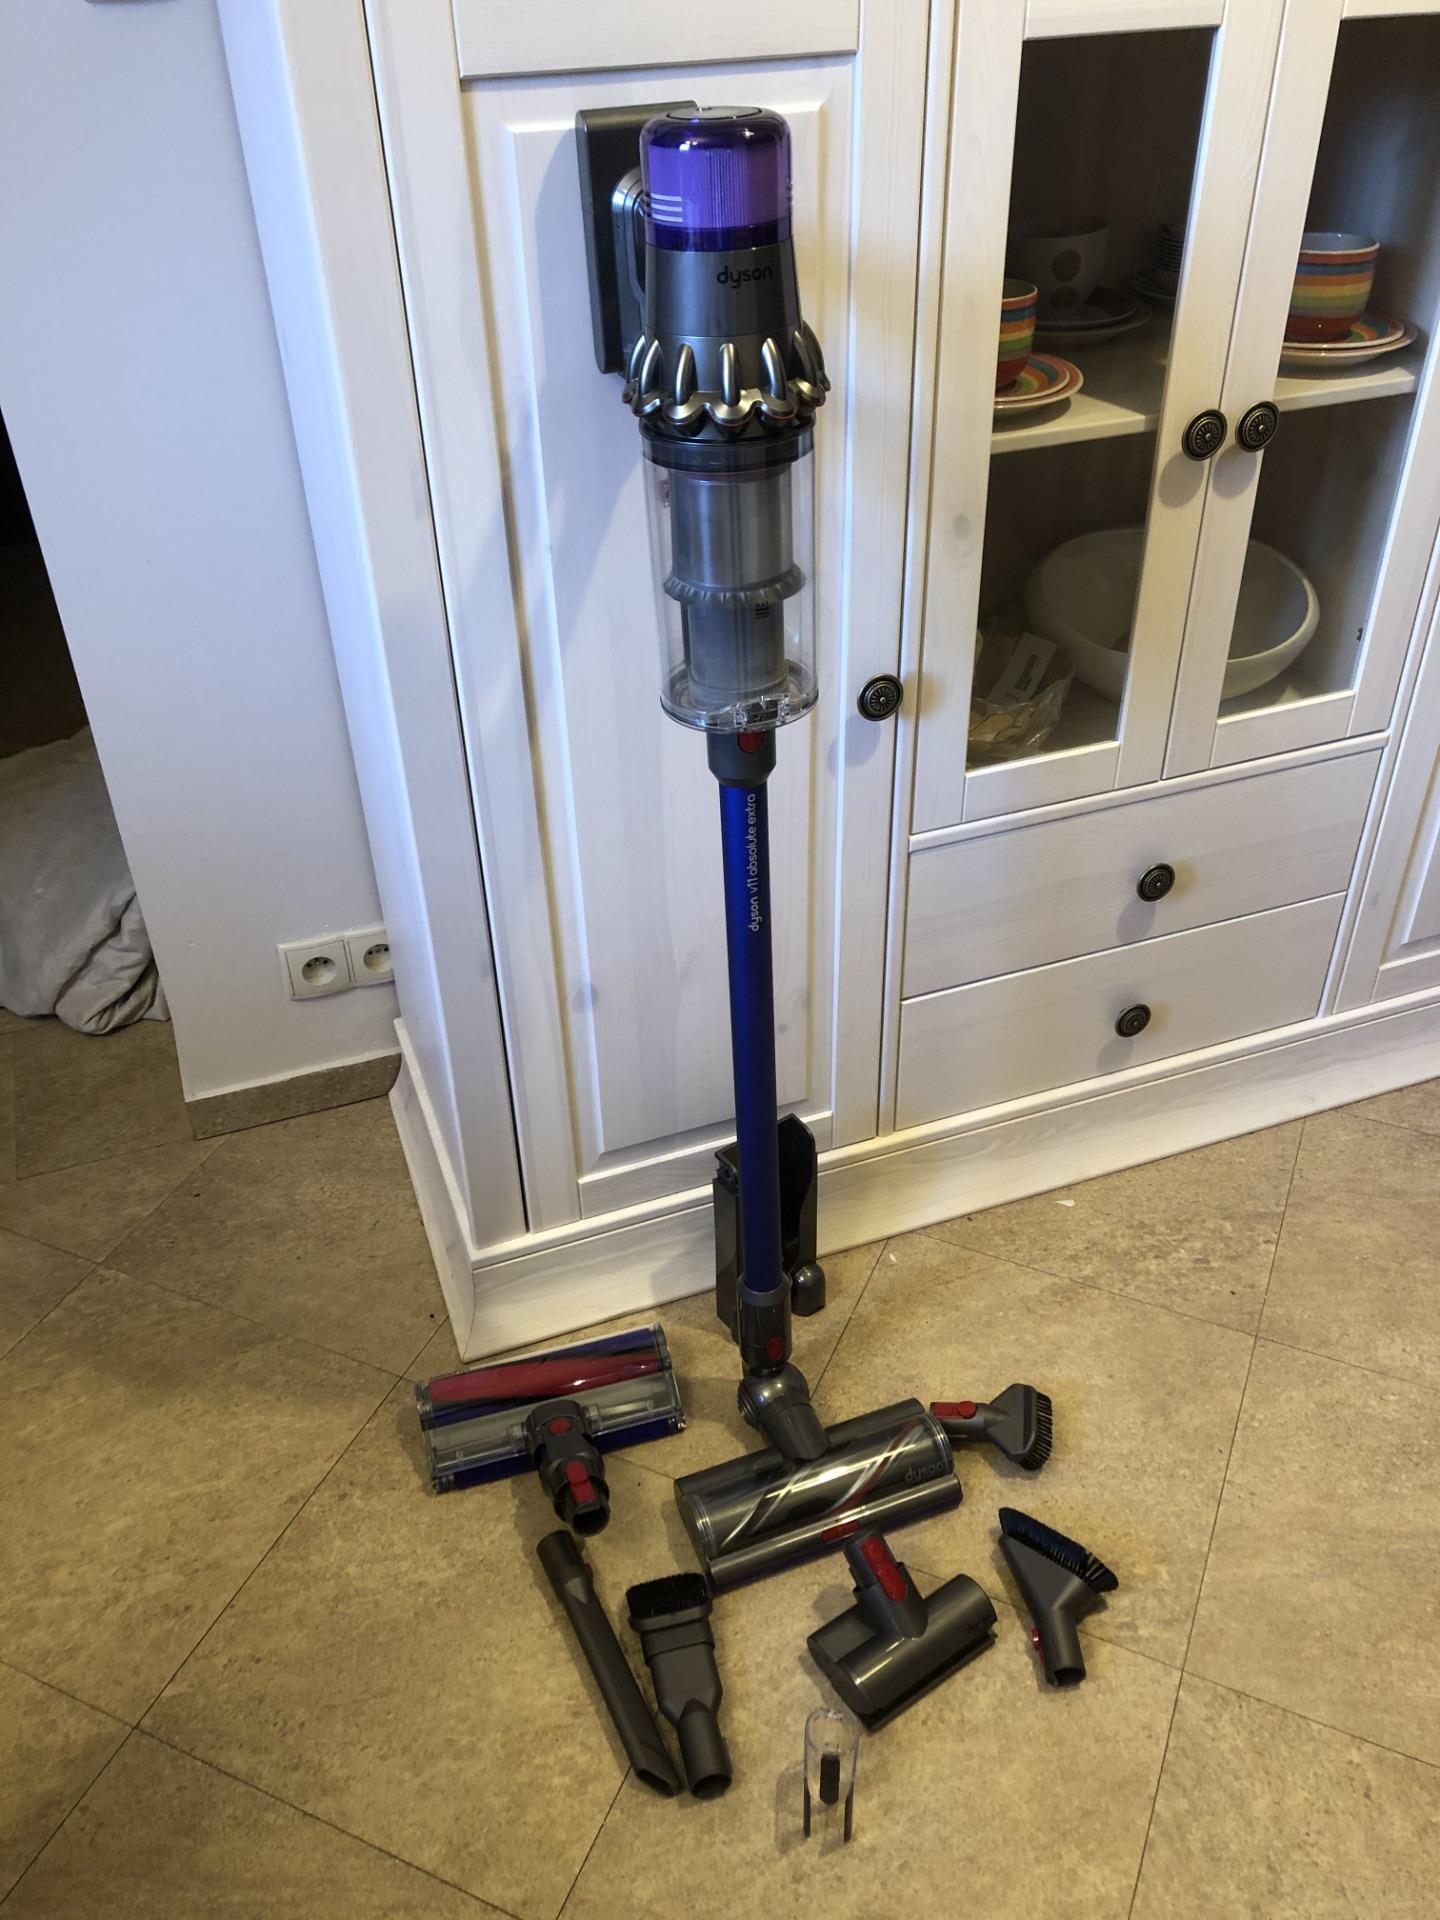 V11 absolute pro. Dyson v11 absolute Extra. Дайсон пылесос v11 absolute Extra Pro. Дайсон v11 absolute. Dyson v11 absolute.